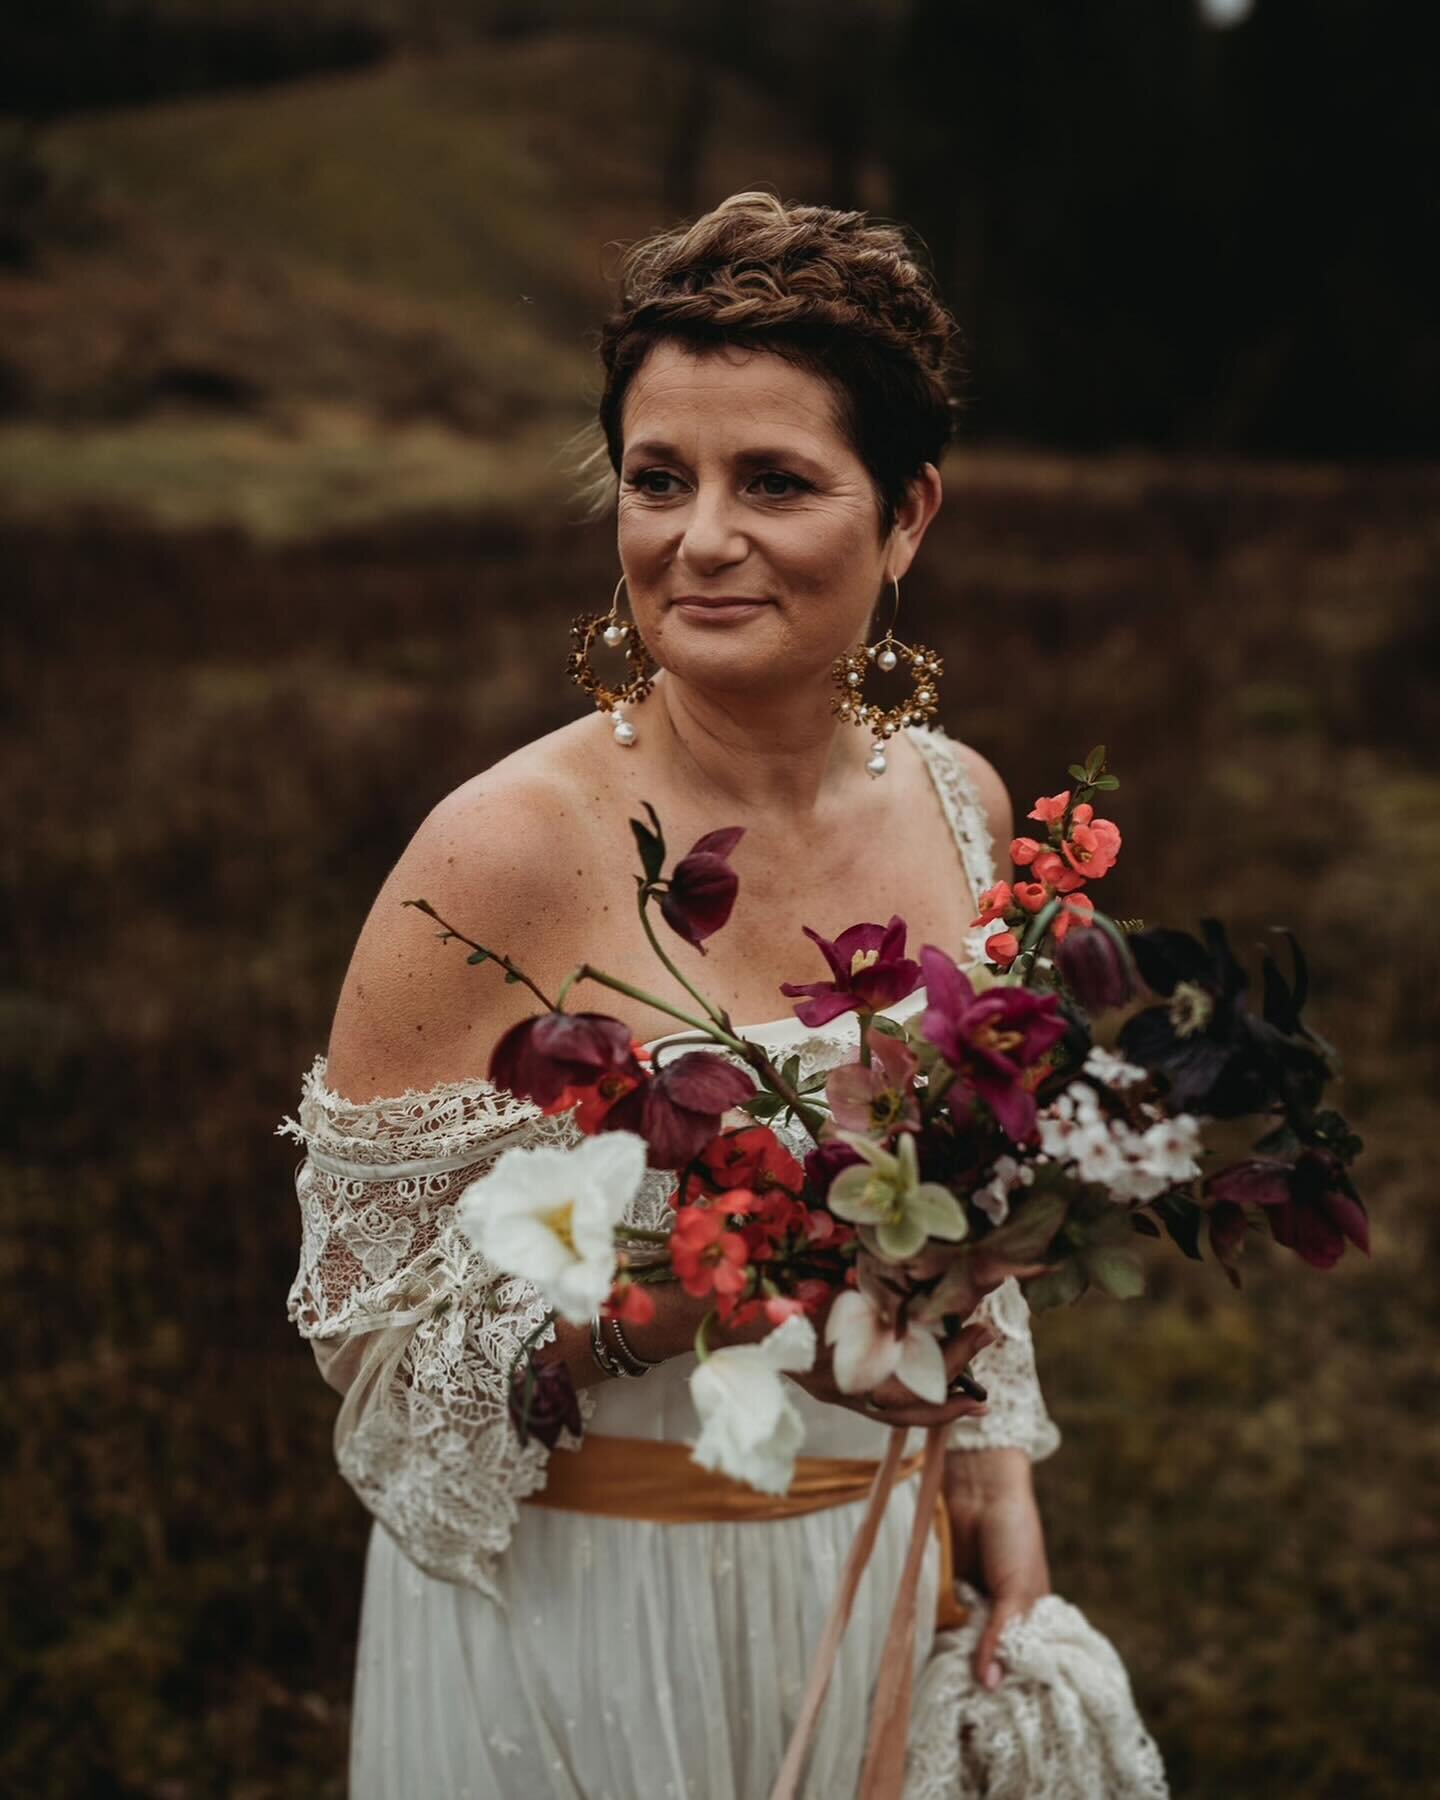 I cut my first dark hellebores yesterday and it made me think of this beautiful bride and this dark and moody bouquet and image pretty captured by @thymelanephoto 🖤

From the archives, but still looking splendid. 

flowers @_wildstems_ 
dress @cambr